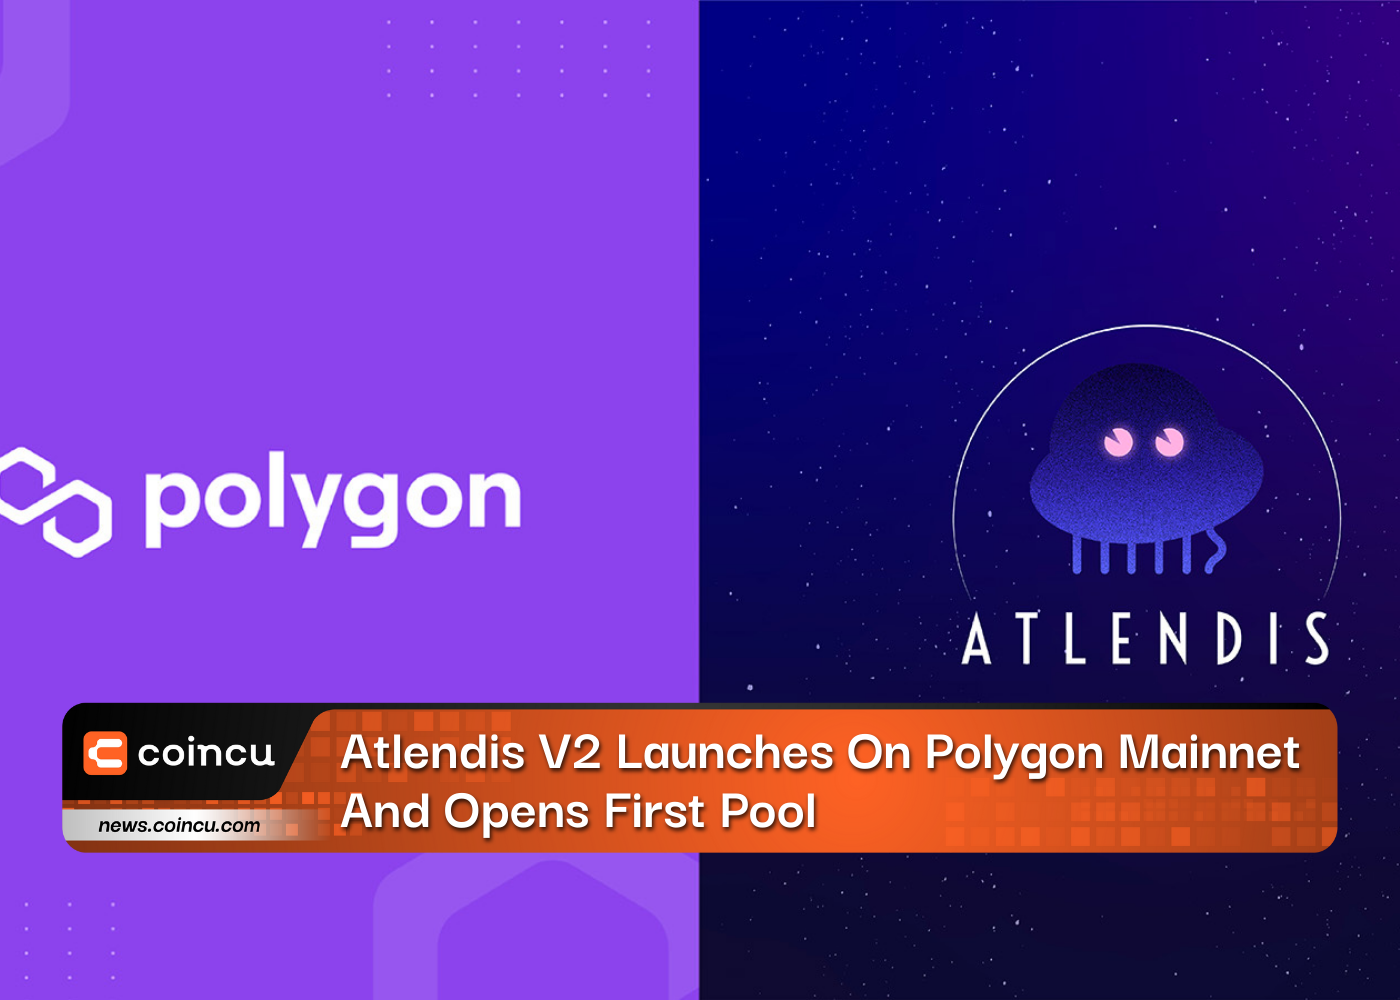 Atlendis V2 Launches On Polygon Mainnet And Opens First Pool